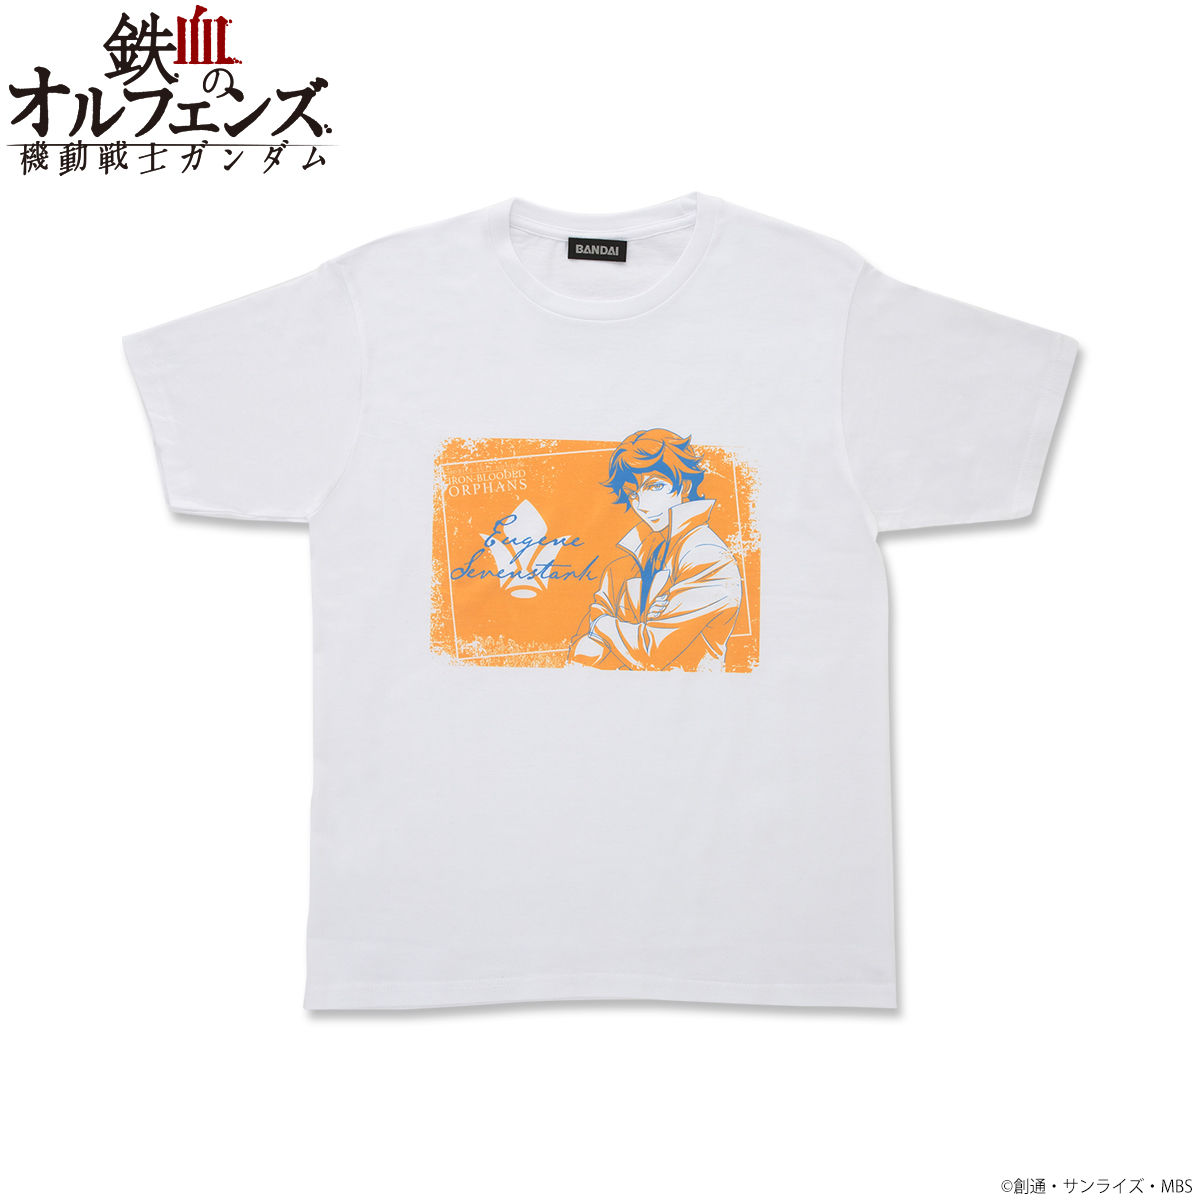 Mobile Suit Gundam: Iron-Blooded Orphans Tricolor-themed T-shirt